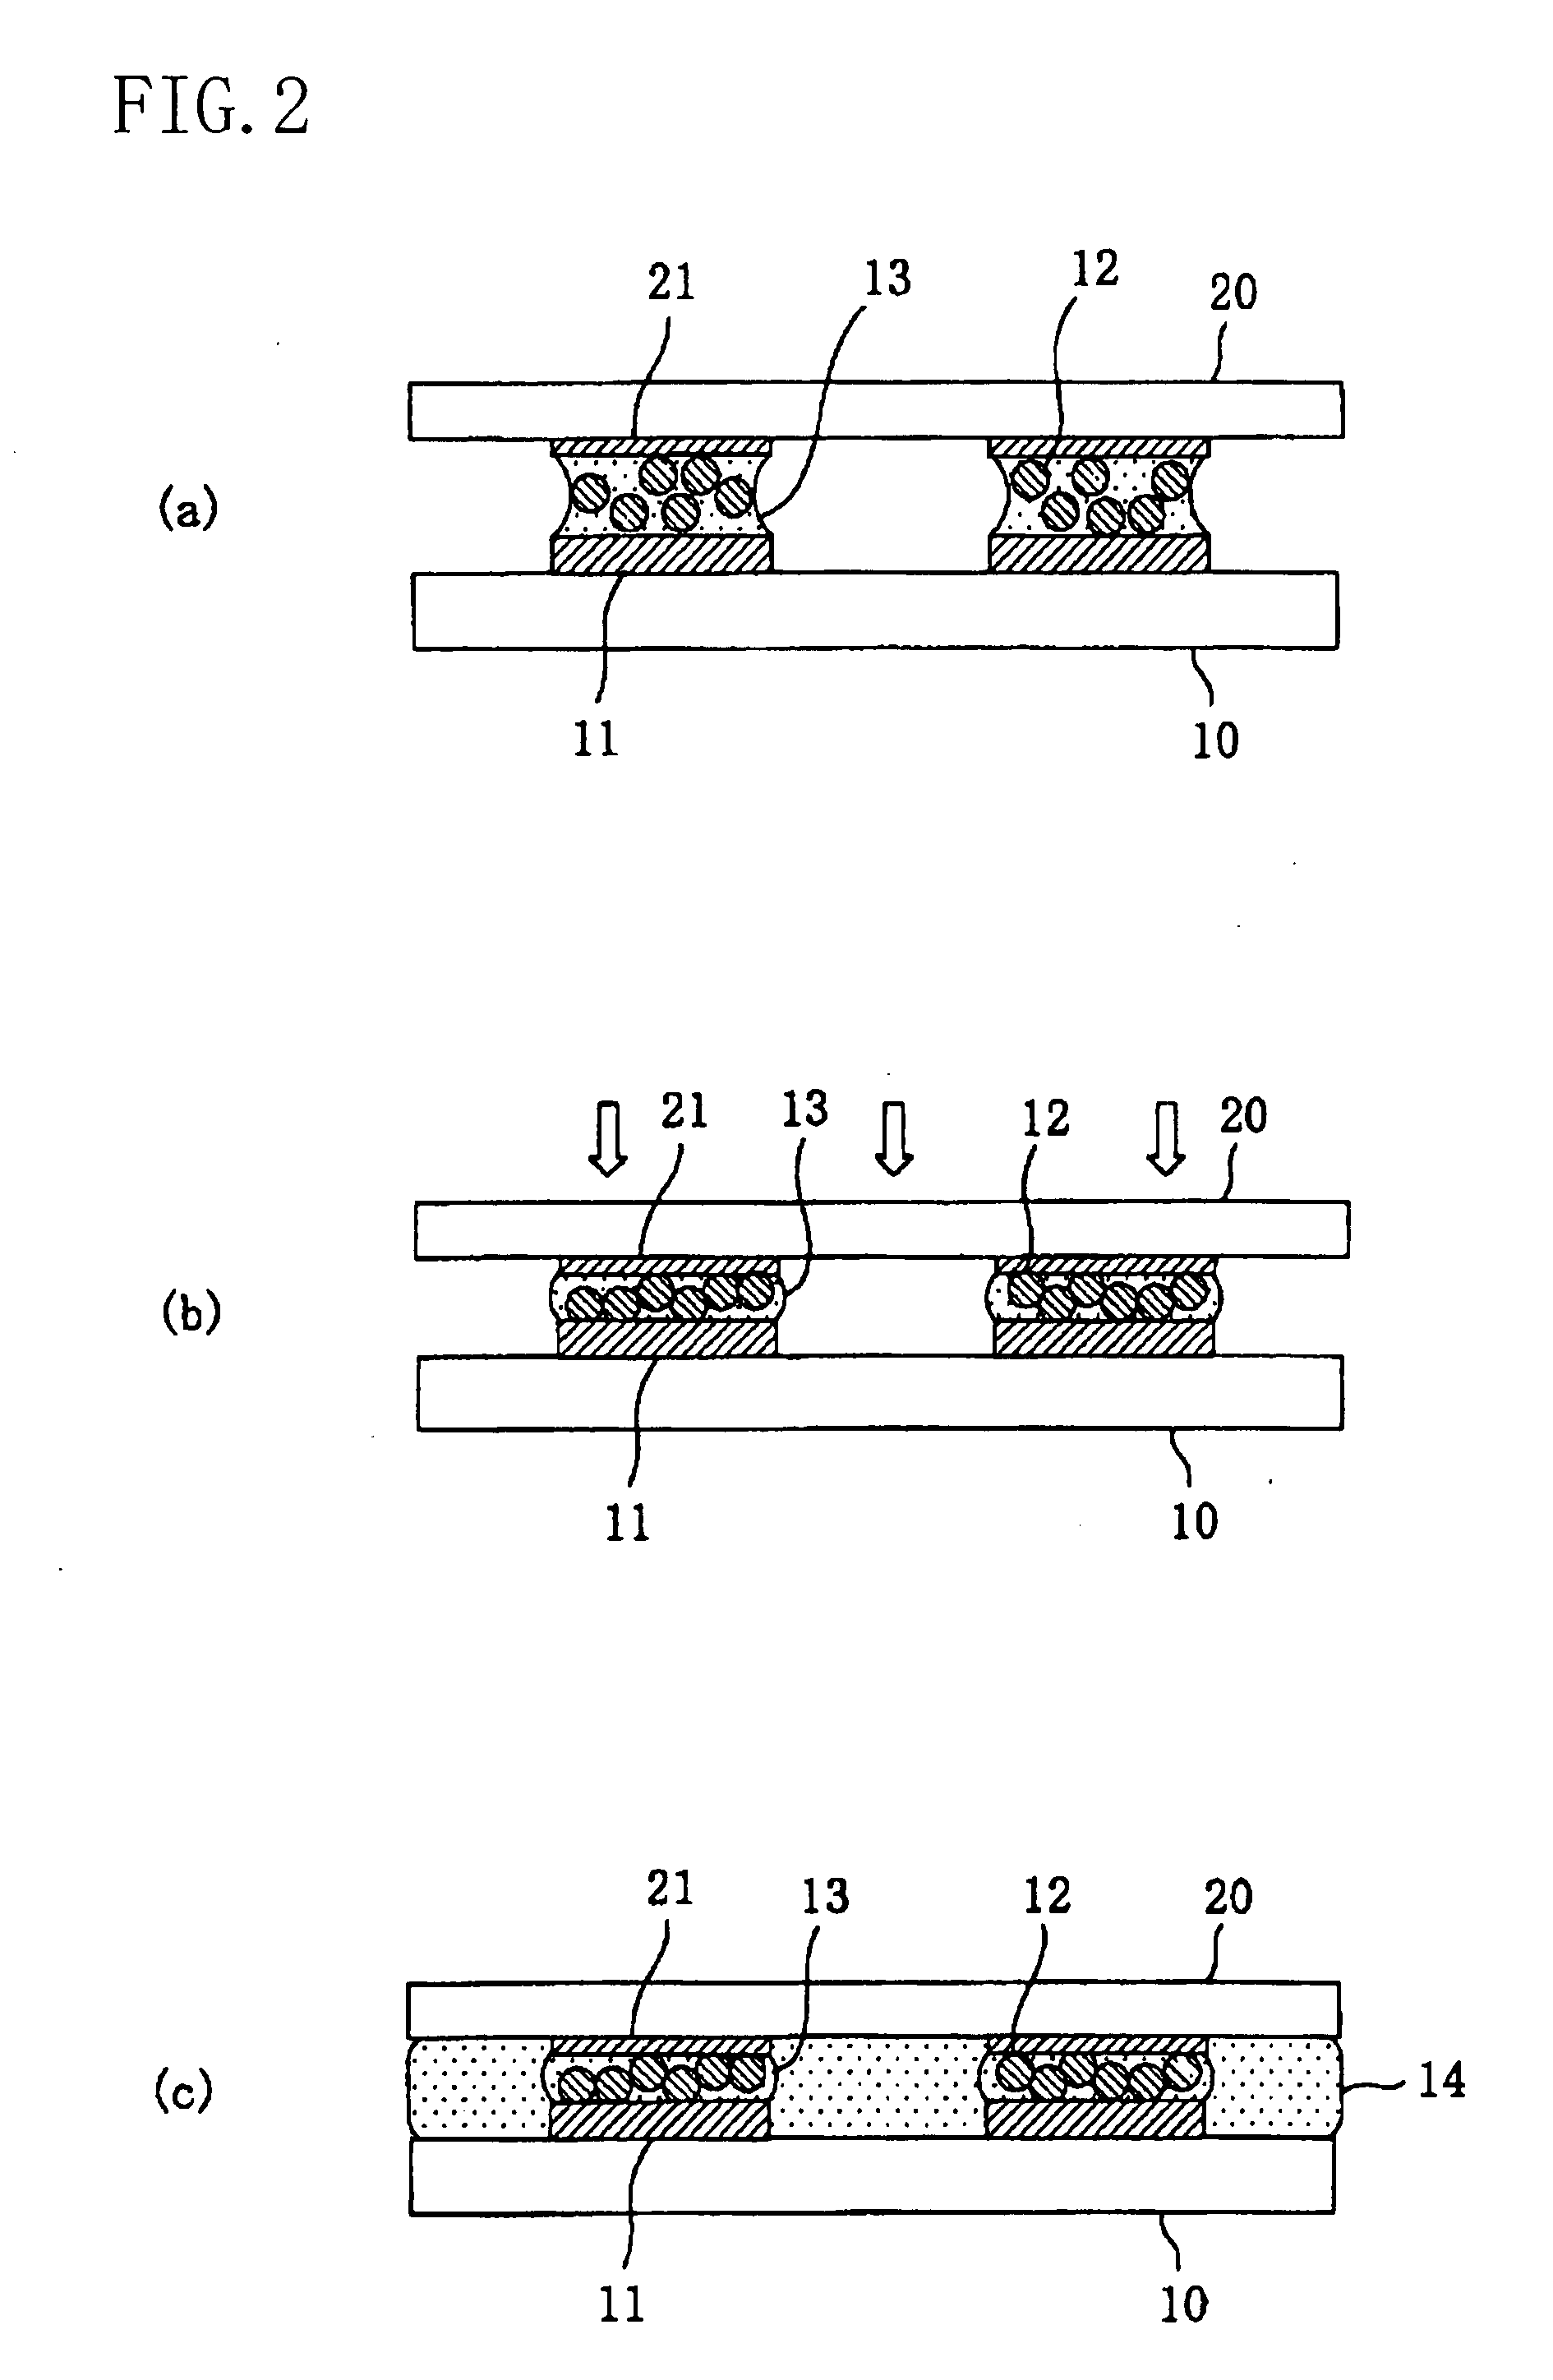 Flip chip mounting method and method for connecting substrates